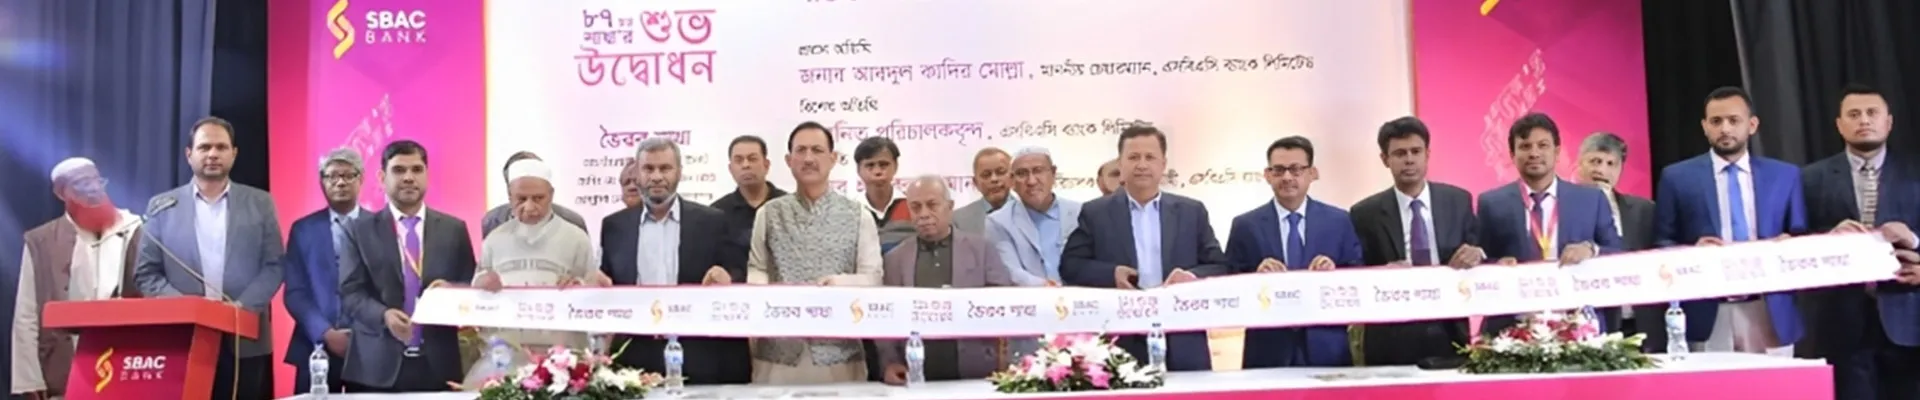 SBAC SBAC Bank Expands Footprint with New Bhairab Branch